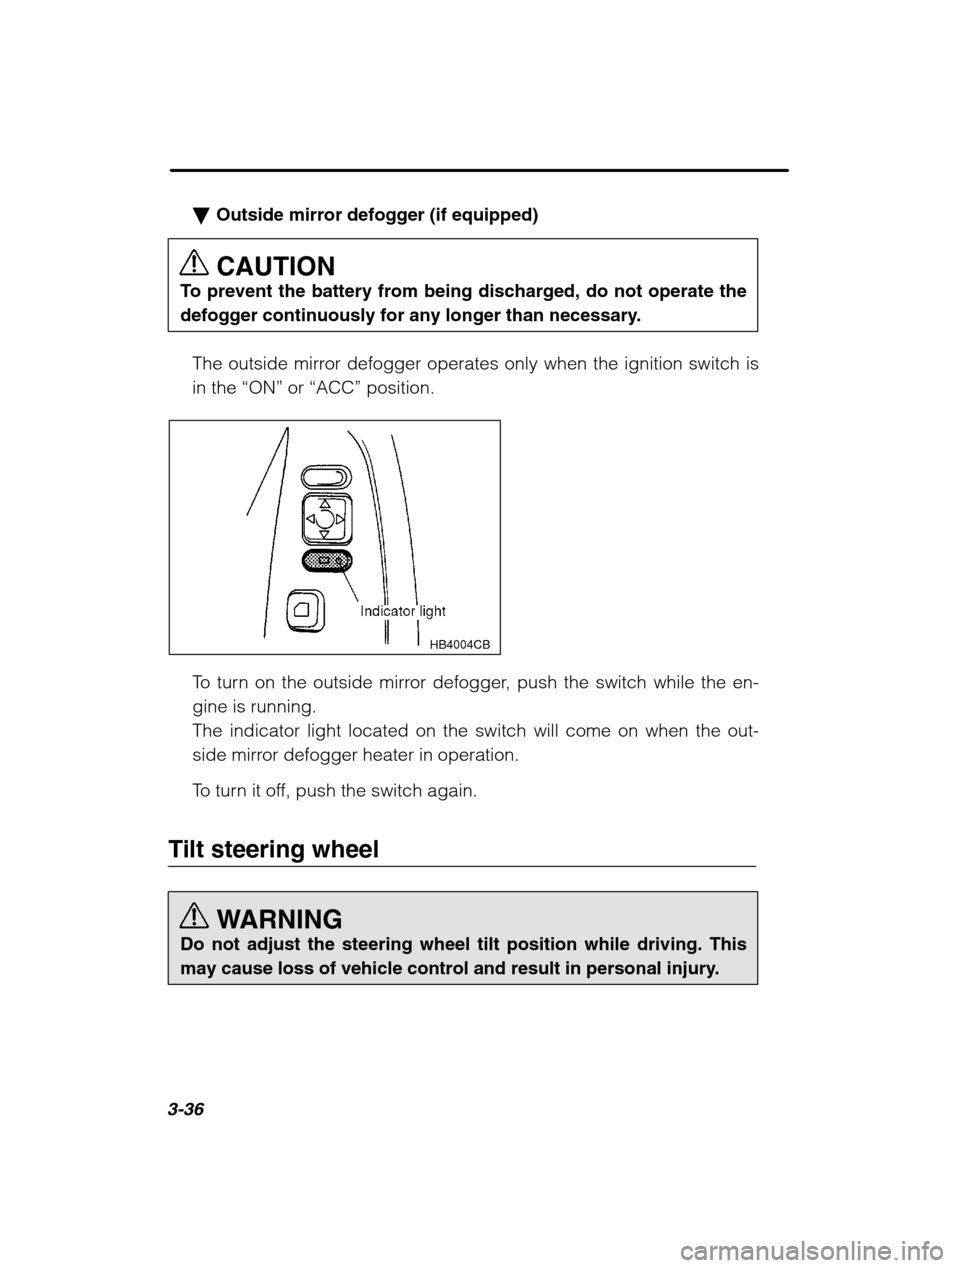 SUBARU LEGACY 2002 3.G Owners Manual 3-36
�Outside mirror defogger (if equipped) CAUTION
To prevent the battery from being discharged, do not operate the 
defogger continuously for any longer than necessary.
The outside mirror defogger o